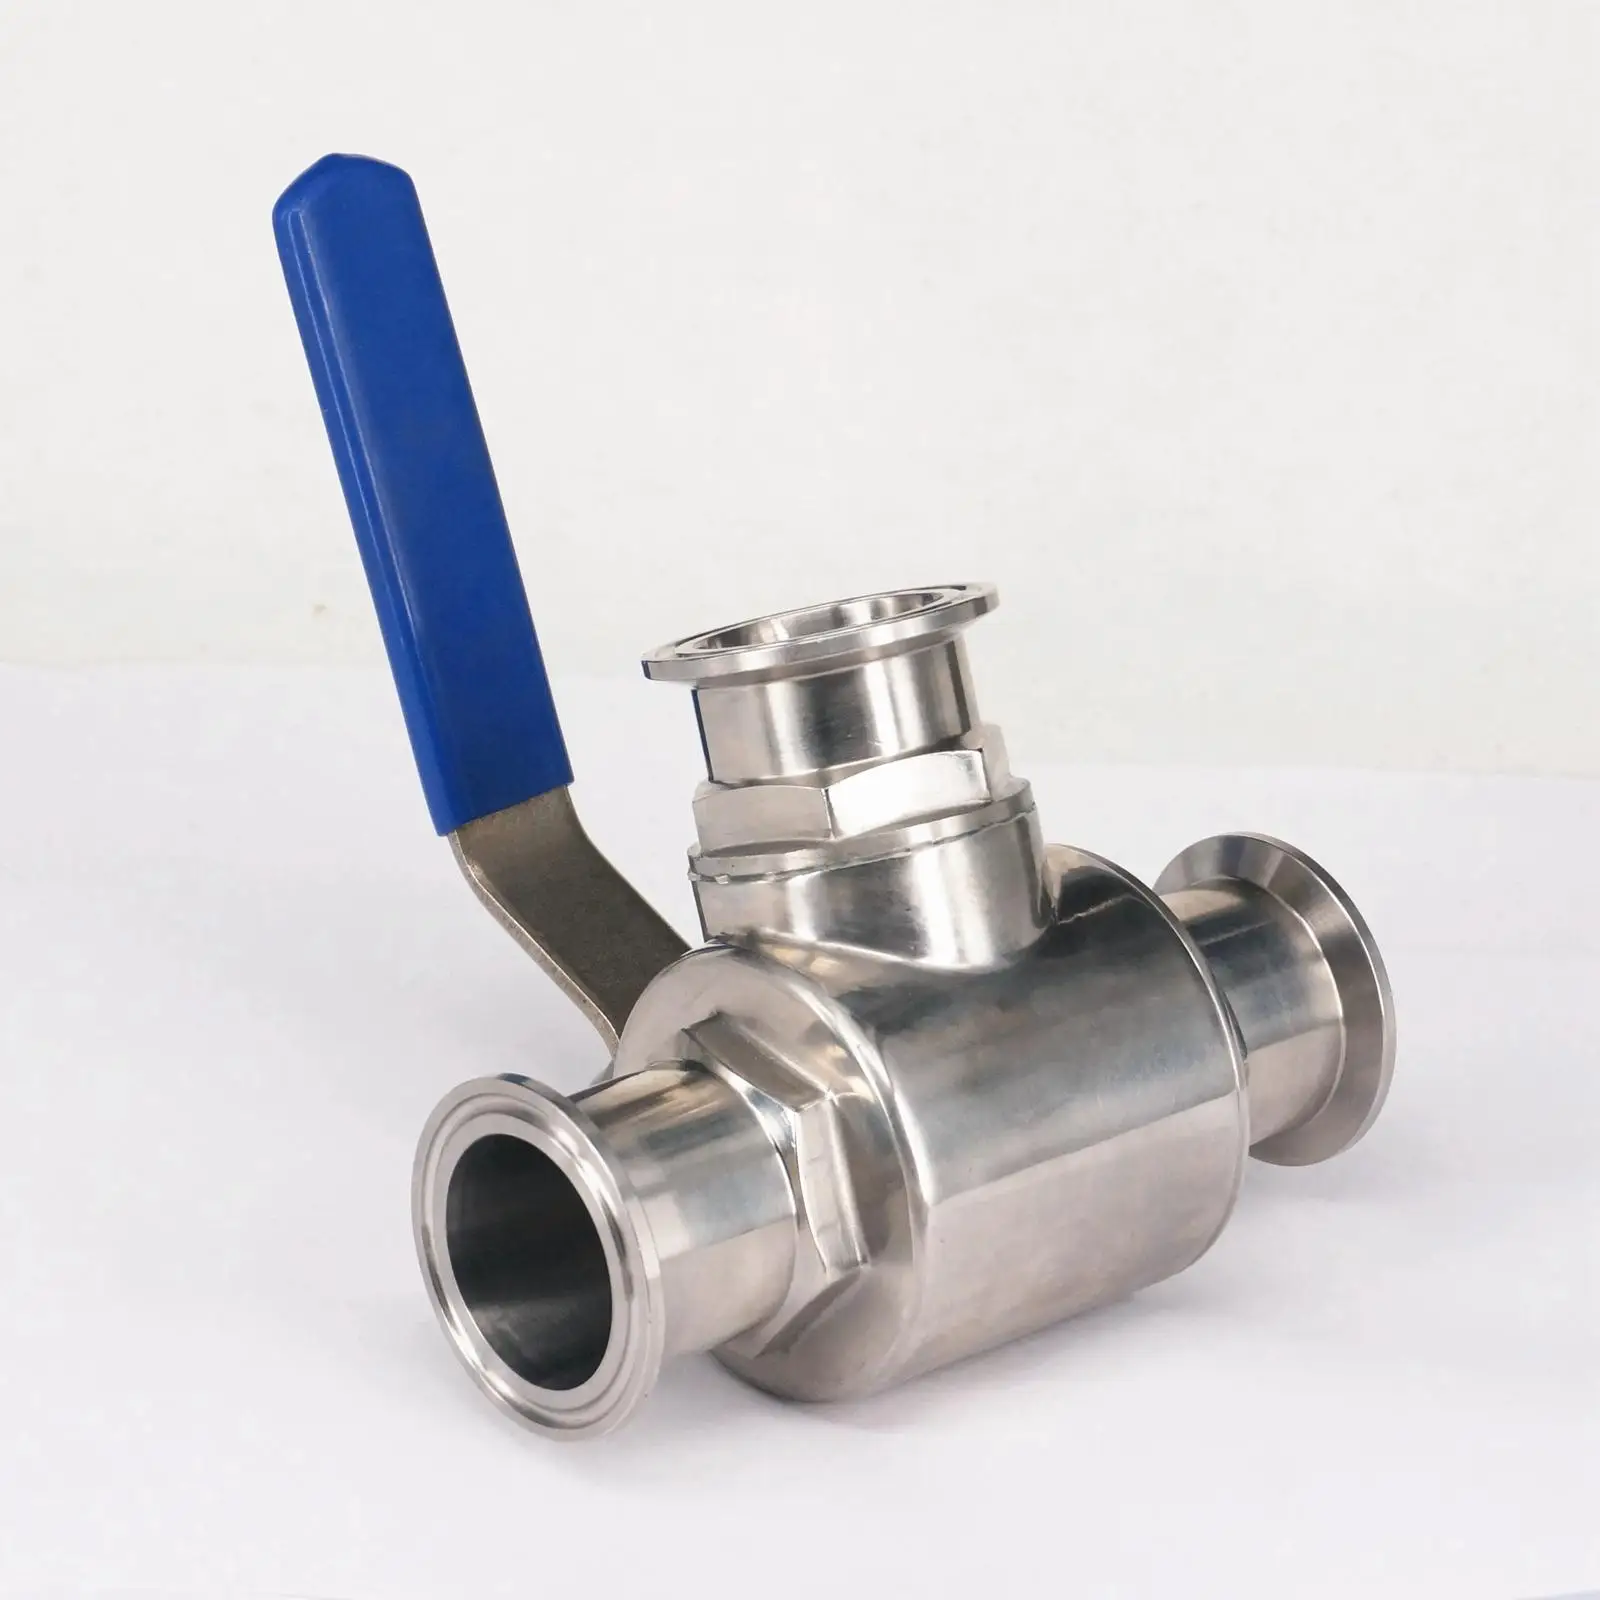 

1-1/2" 38mm 304 Stainless Steel Sanitary 3 Way L port Ball Valve 1.5" Tri Clamp Ferrule Type For Homebrew Diary Product